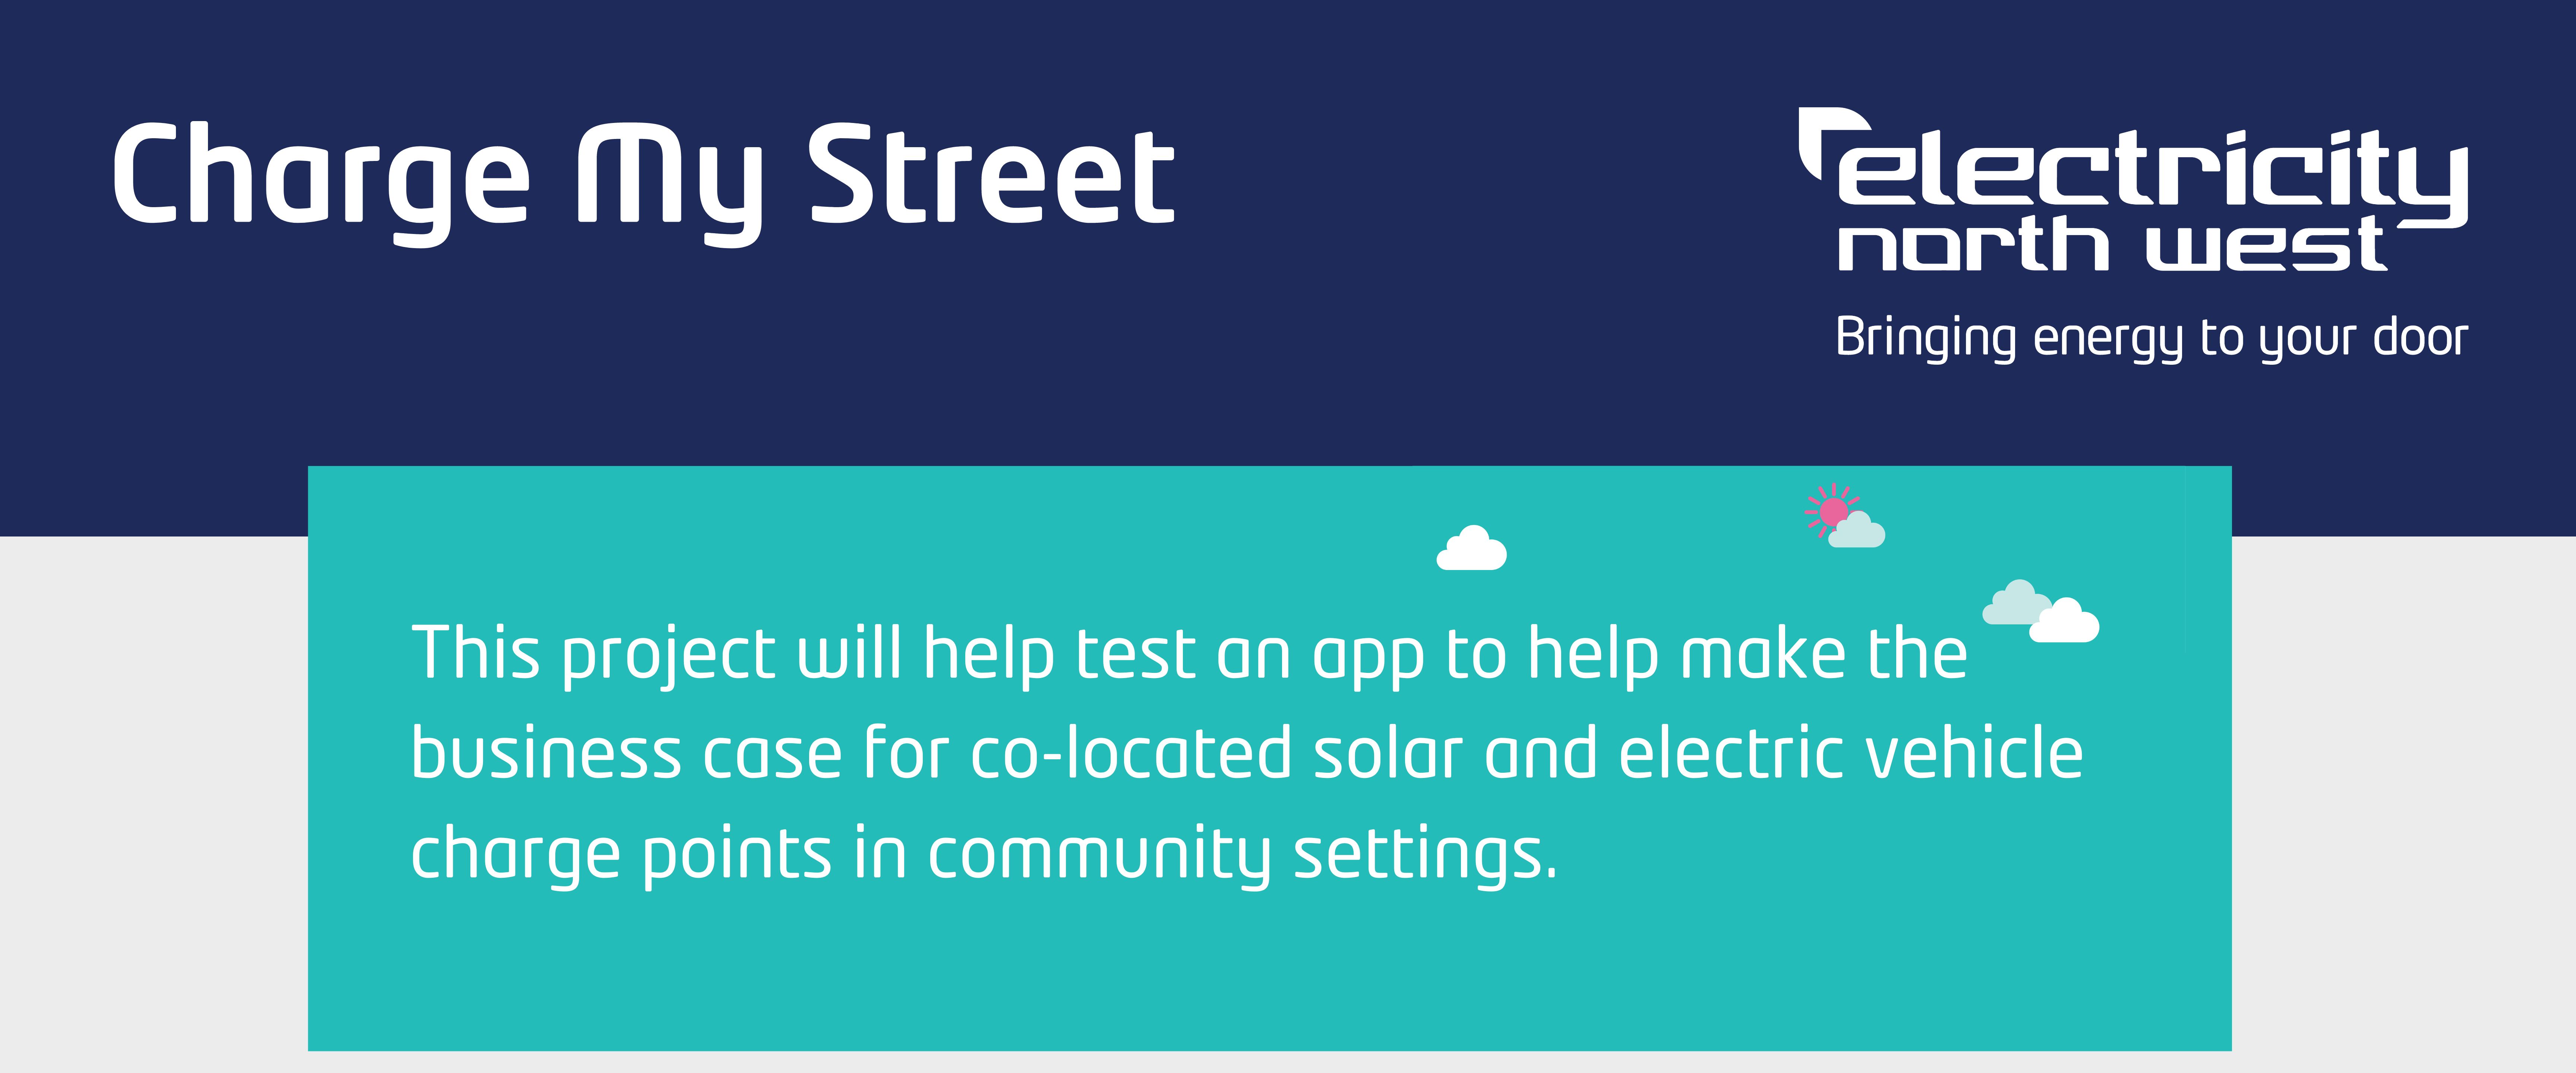 Charge My Street, This project will help test an app to help make the business case for co-located solar and electric vehicle charge points in community settings
